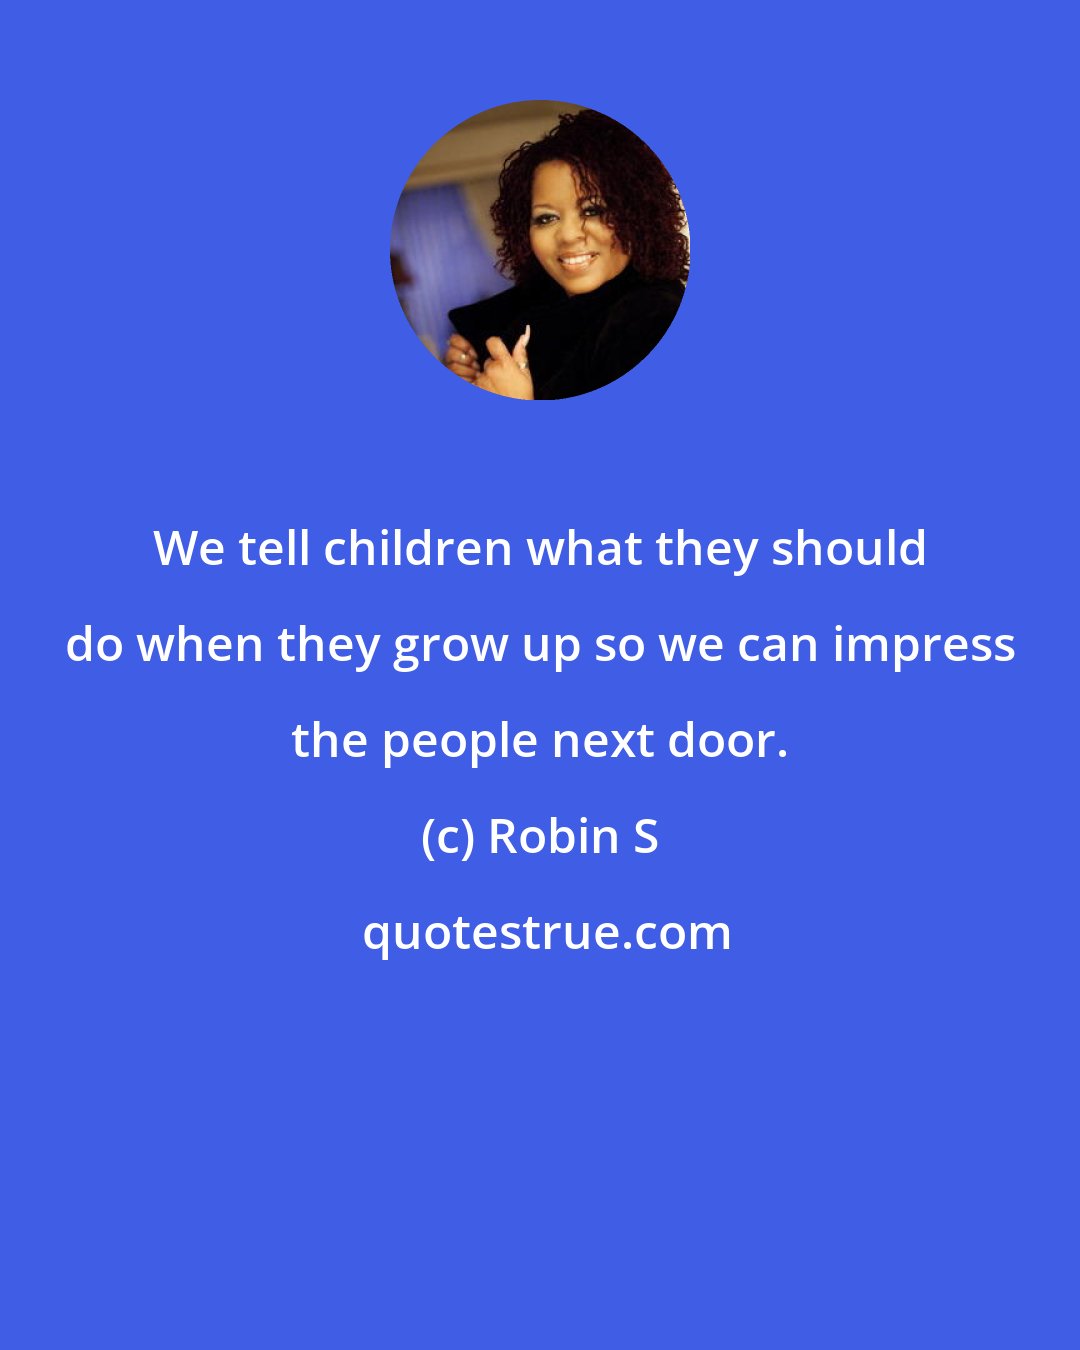 Robin S: We tell children what they should do when they grow up so we can impress the people next door.